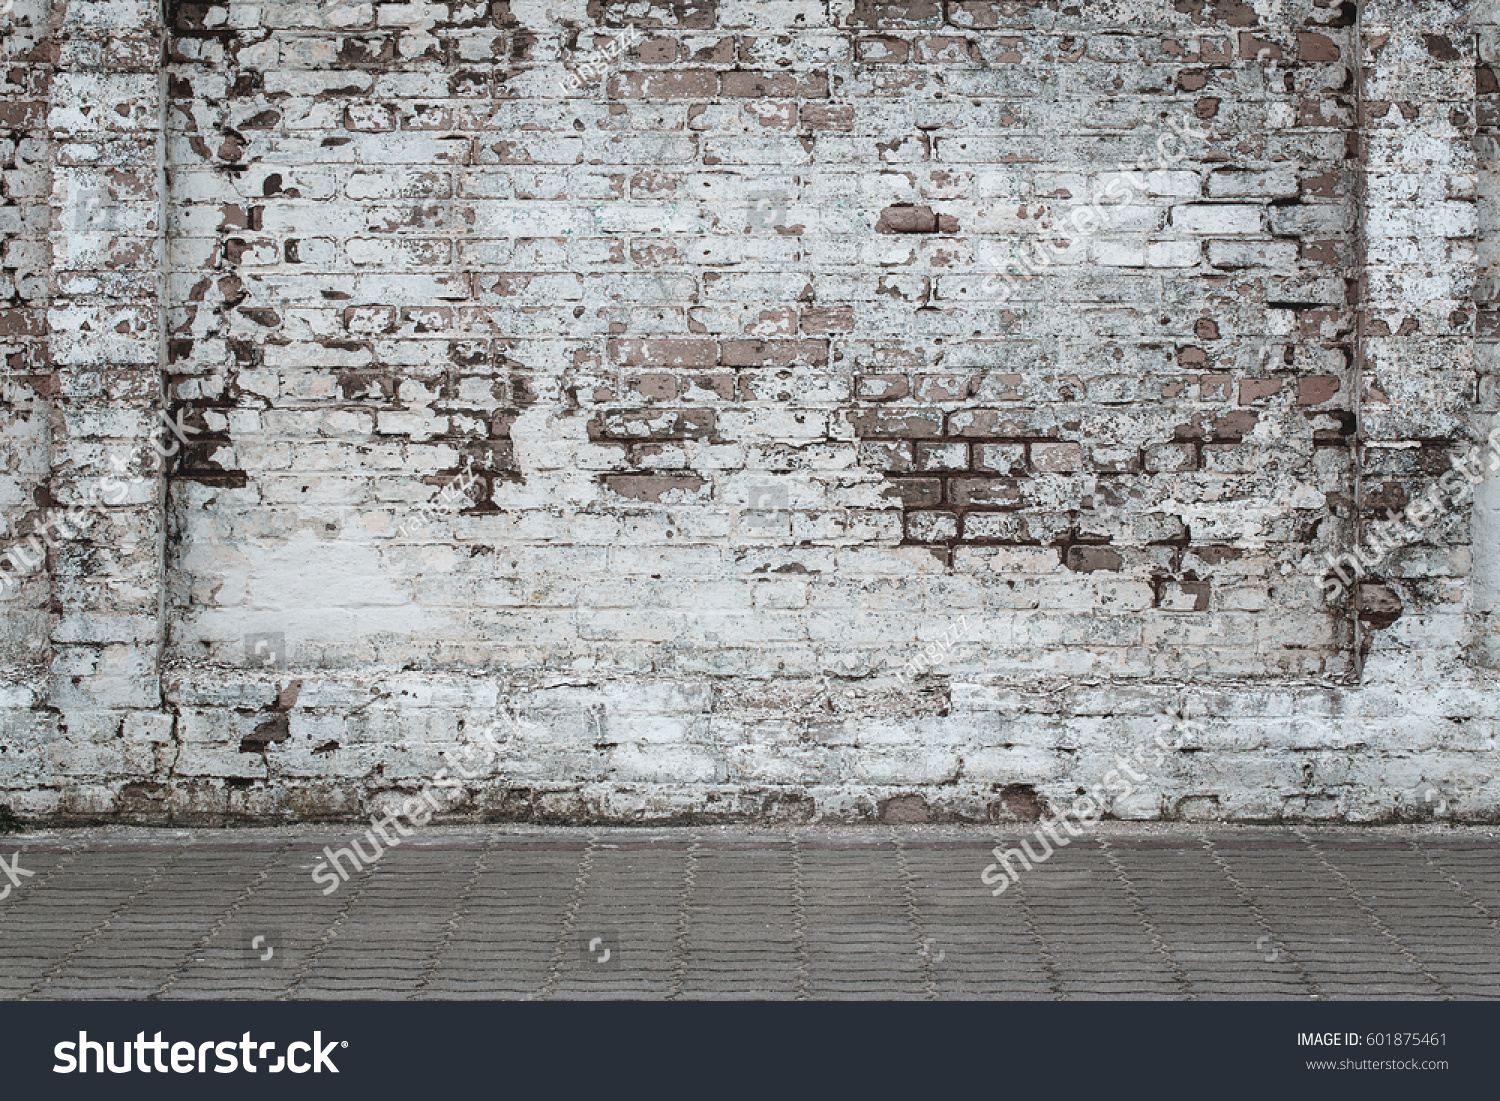 Urban background, white ruined industrial brick wall with copy space #601875461